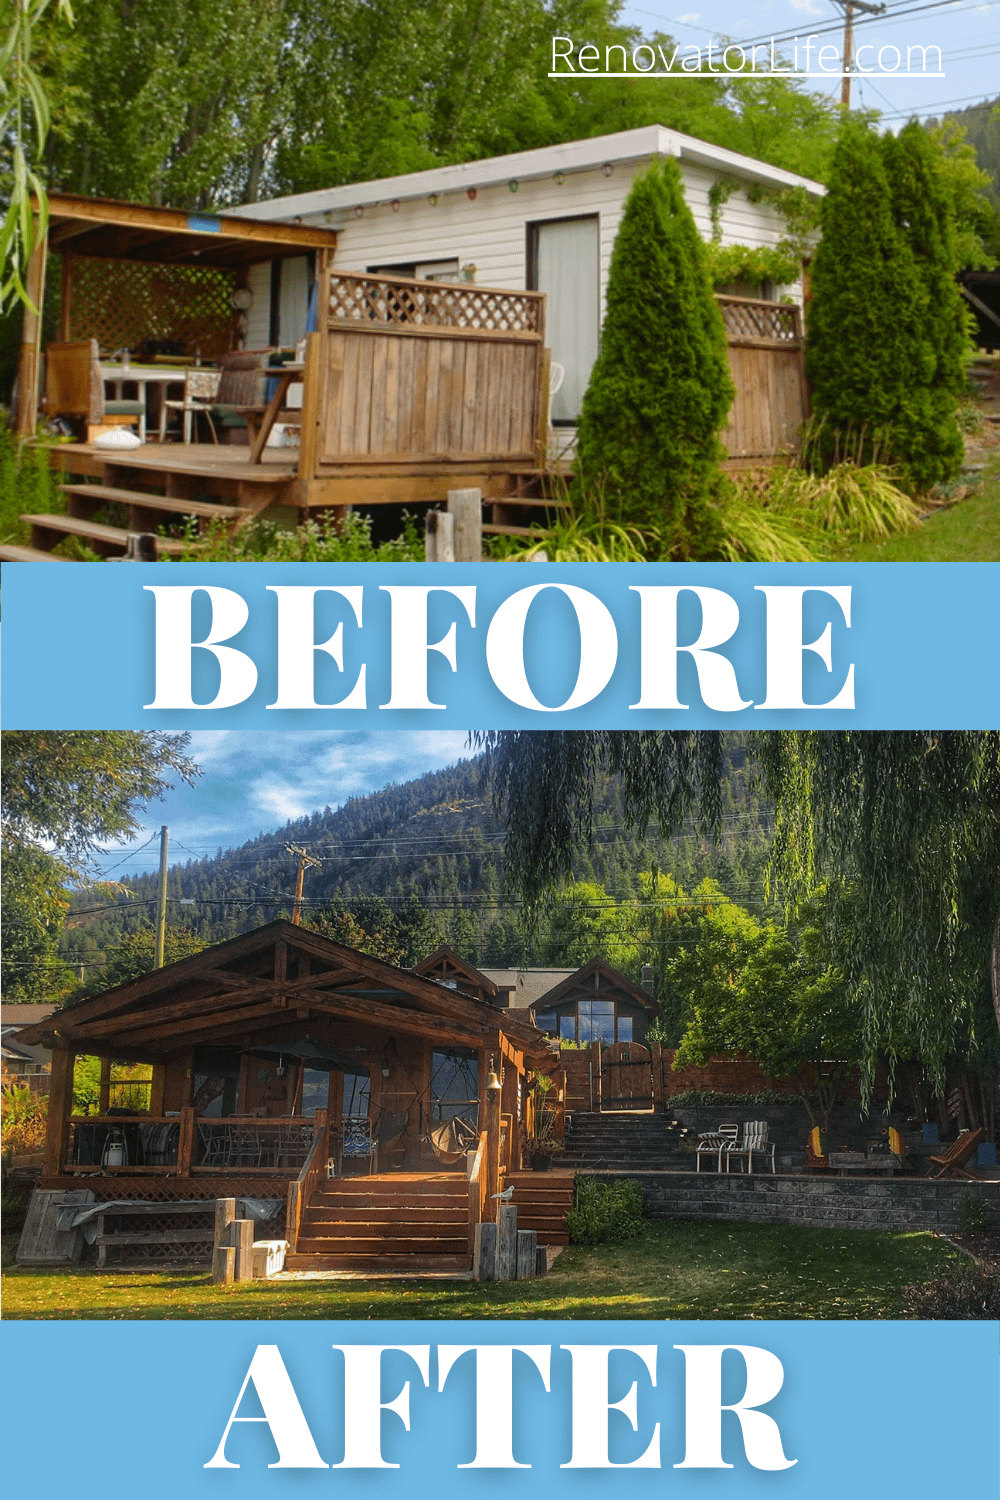 Before and after photos of the cabin